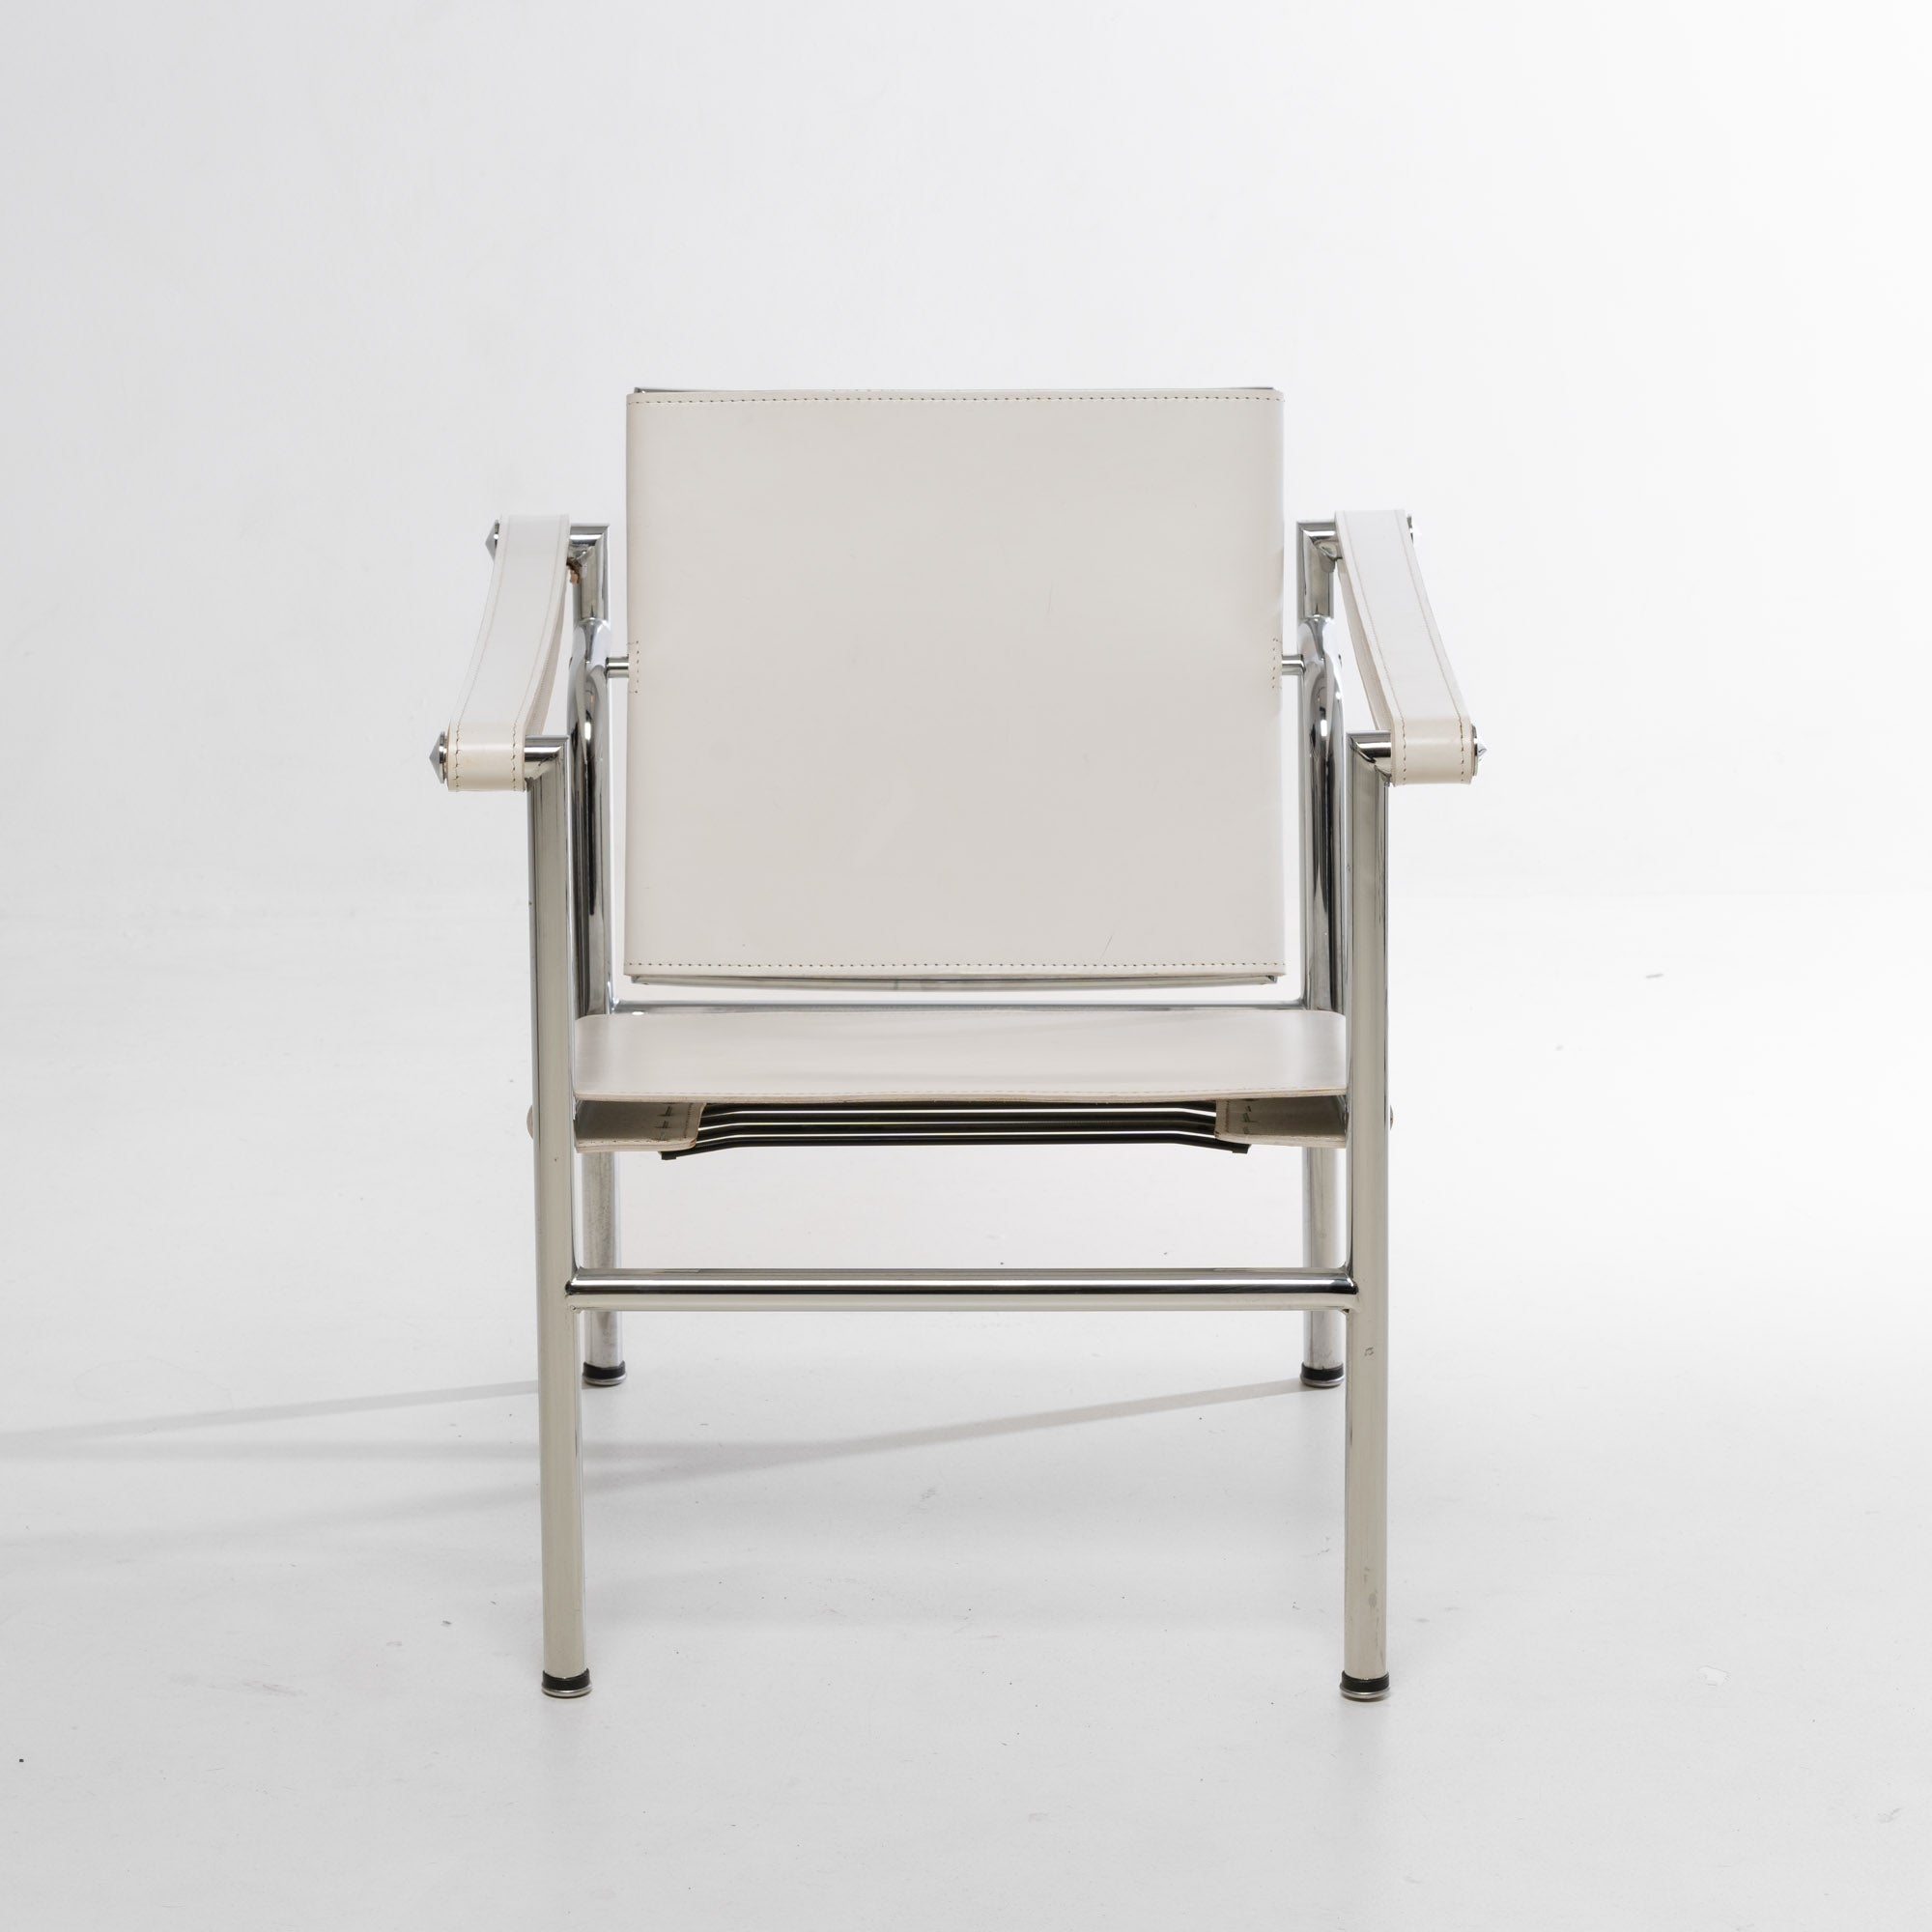 CASSINA, LC1 LOUNGE CHAIR, DESIGNED BY LE CORBUSIER & PIERRE JEANNERET & CHARLOTTE PERRIAND